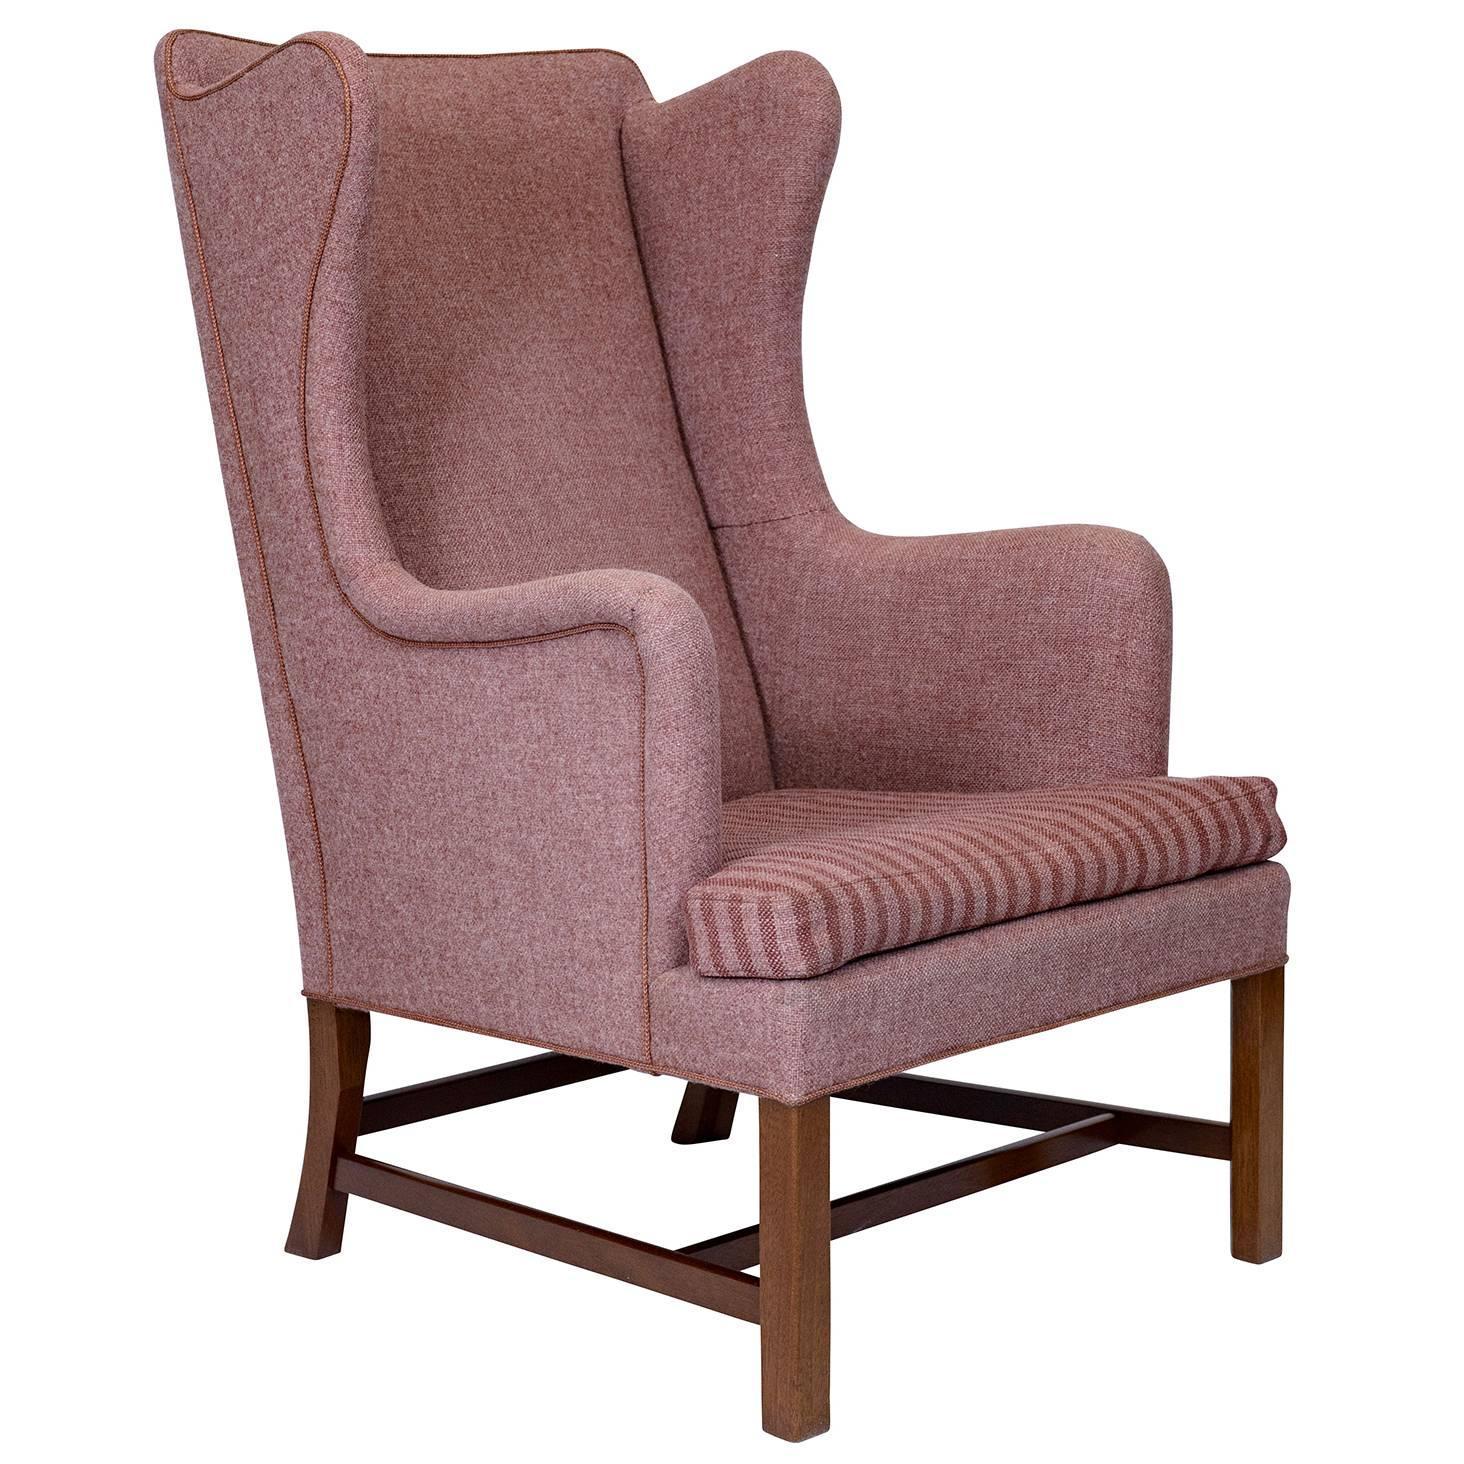 wingback chair for sale